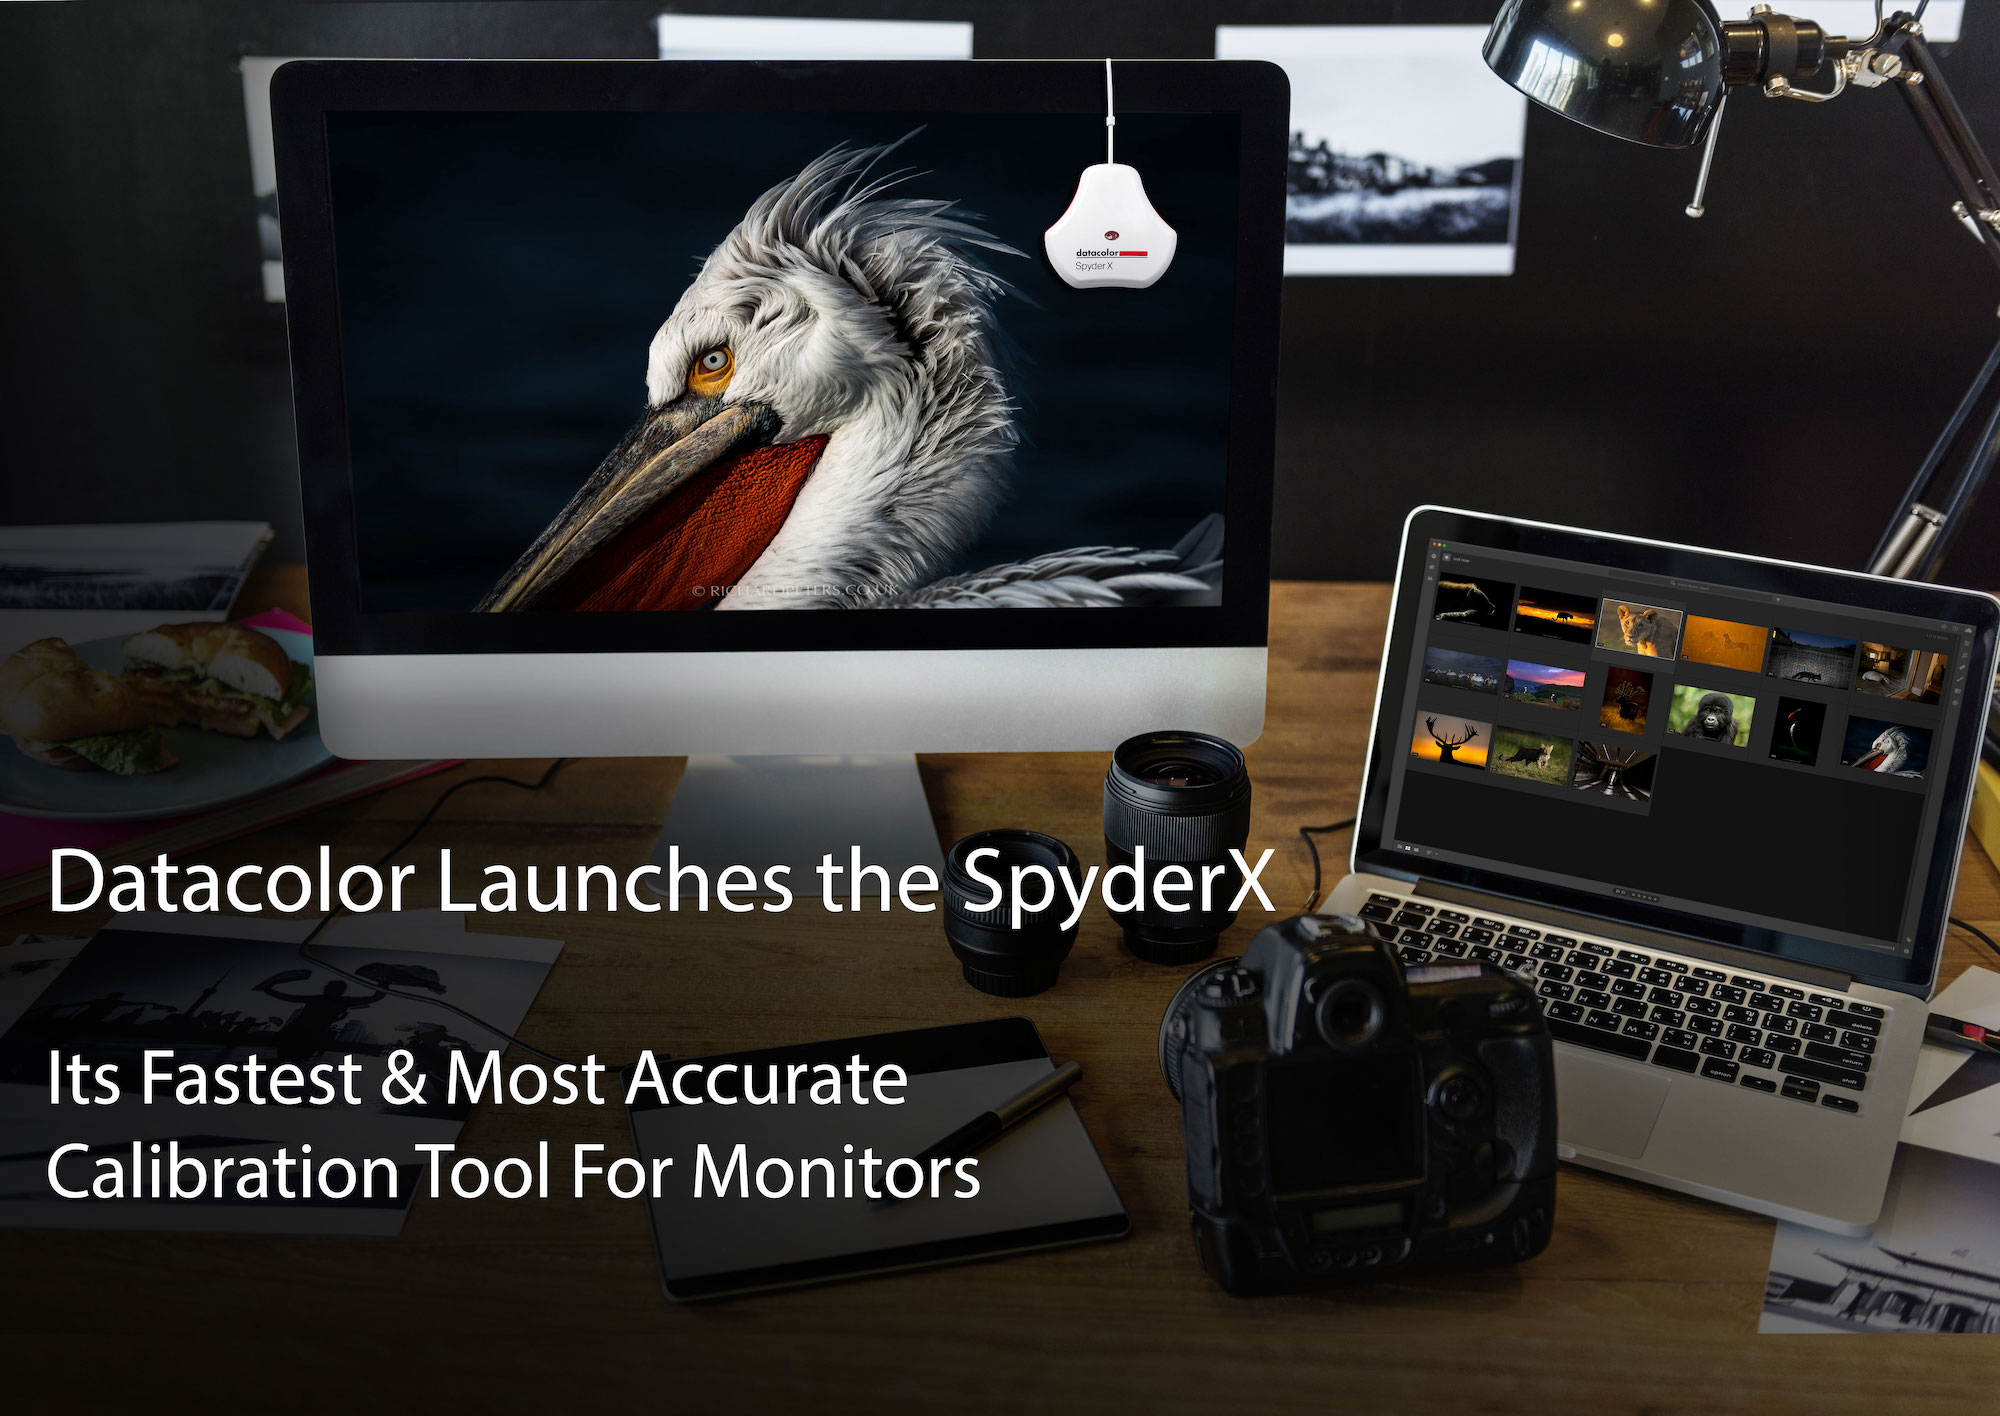 Datacolor Releases SpyderX, Its Fastest & Most Accurate Monitor Calibration Tool Ever